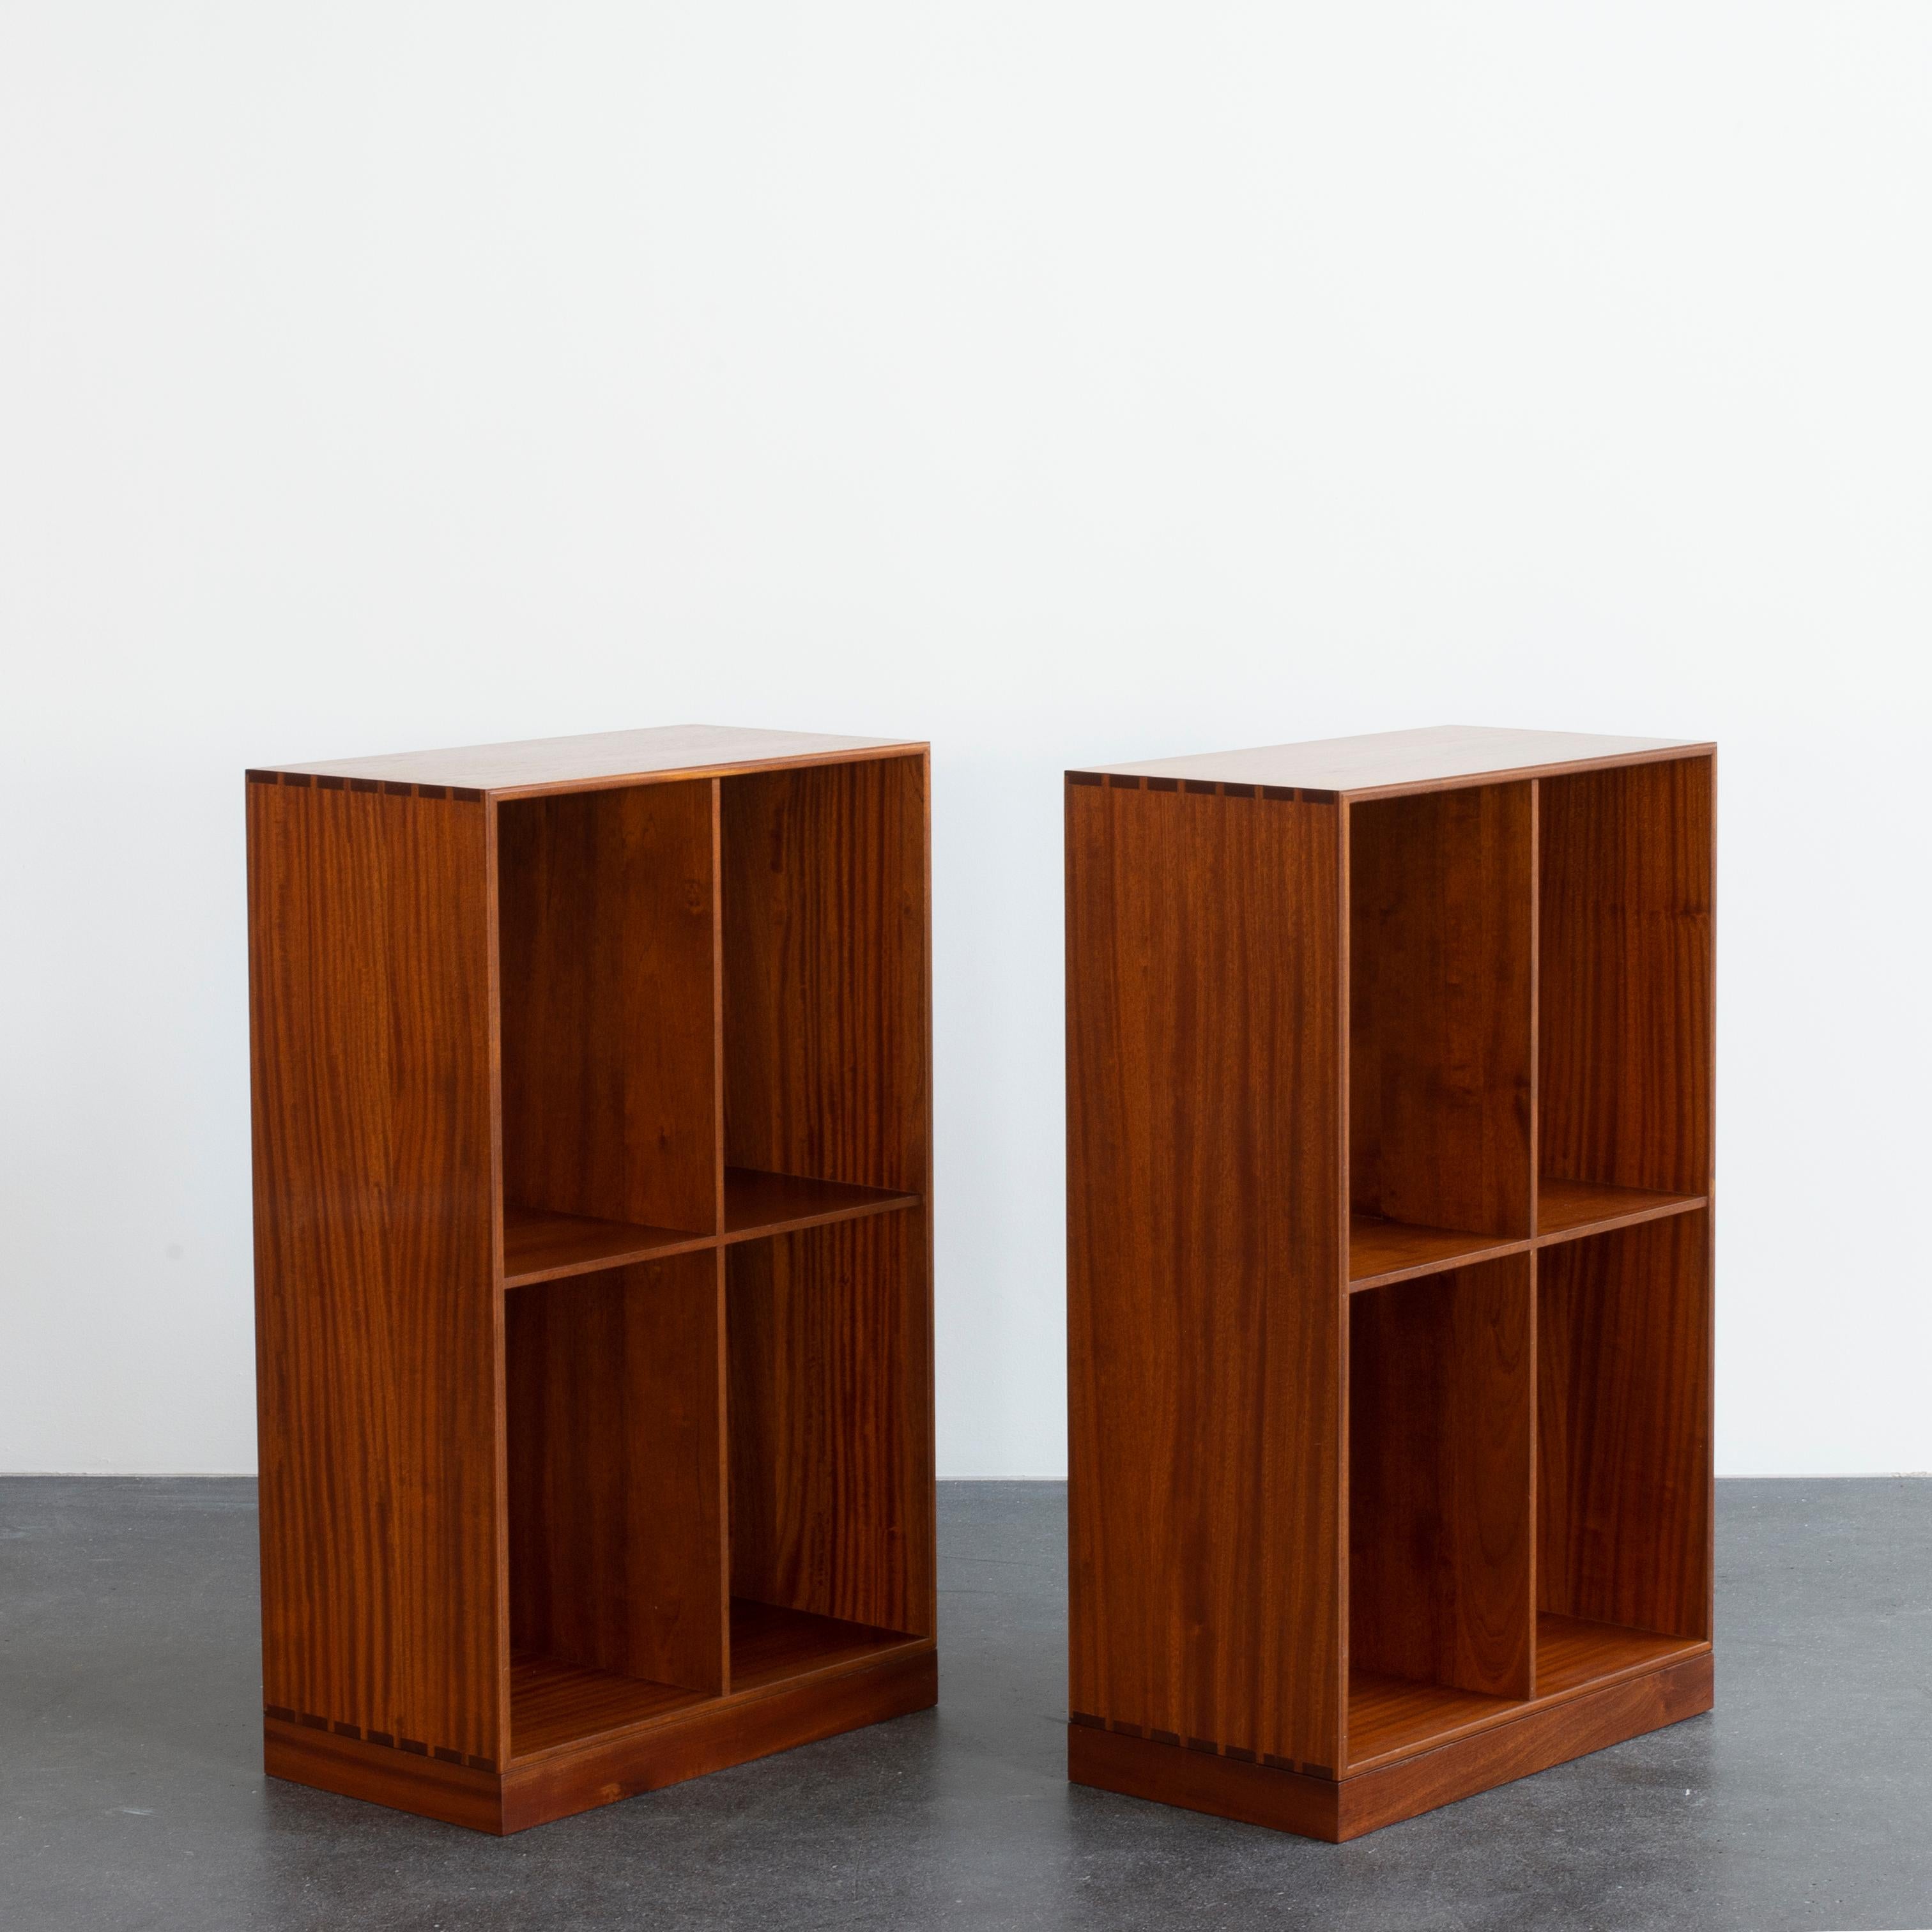 Mogens Koch pair of bookcases in mahogany with plinths. Executed by Rud Rasmussen.

Reverse with paper labels ‘RUD. RASMUSSENS/SNEDKERIER/KØBENHAVN/DENMARK.